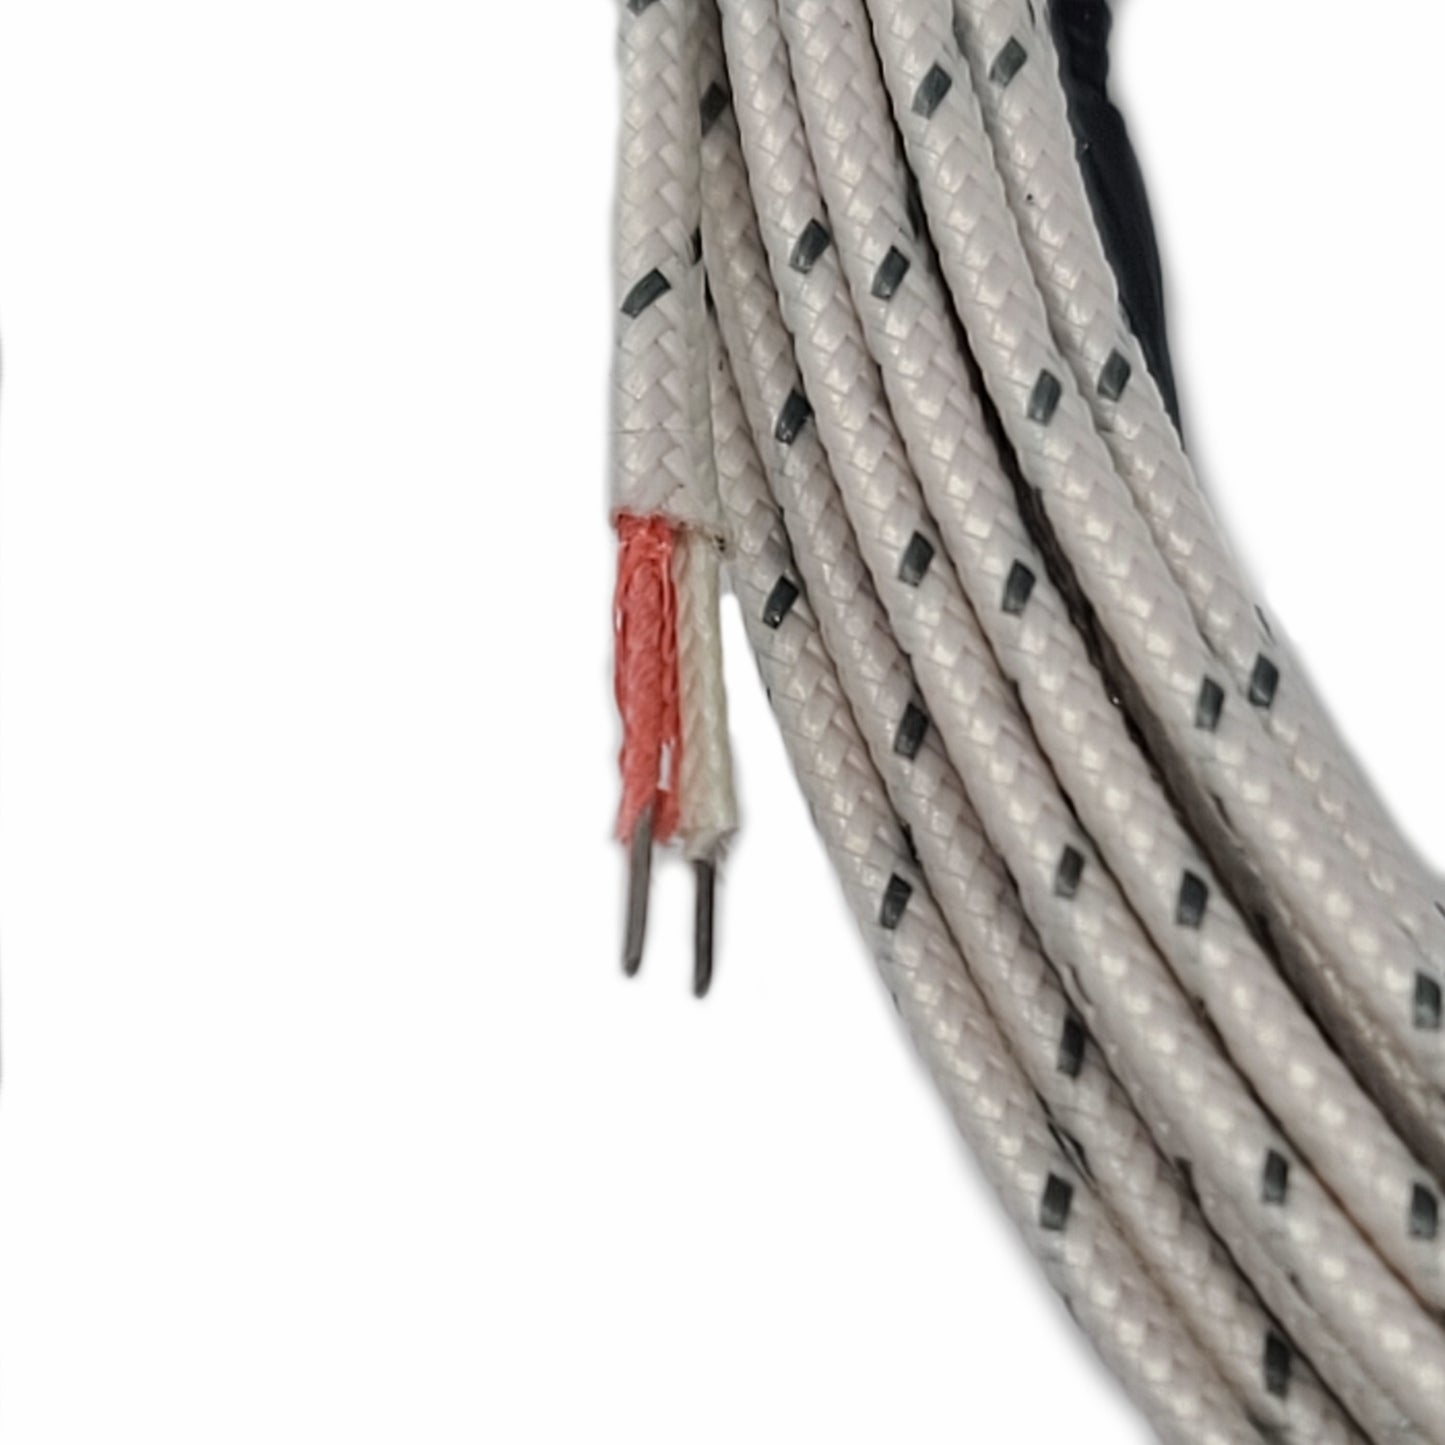 Wire, Fiberglass, 24 AWG, Solid Core, Type J (40 yds.)